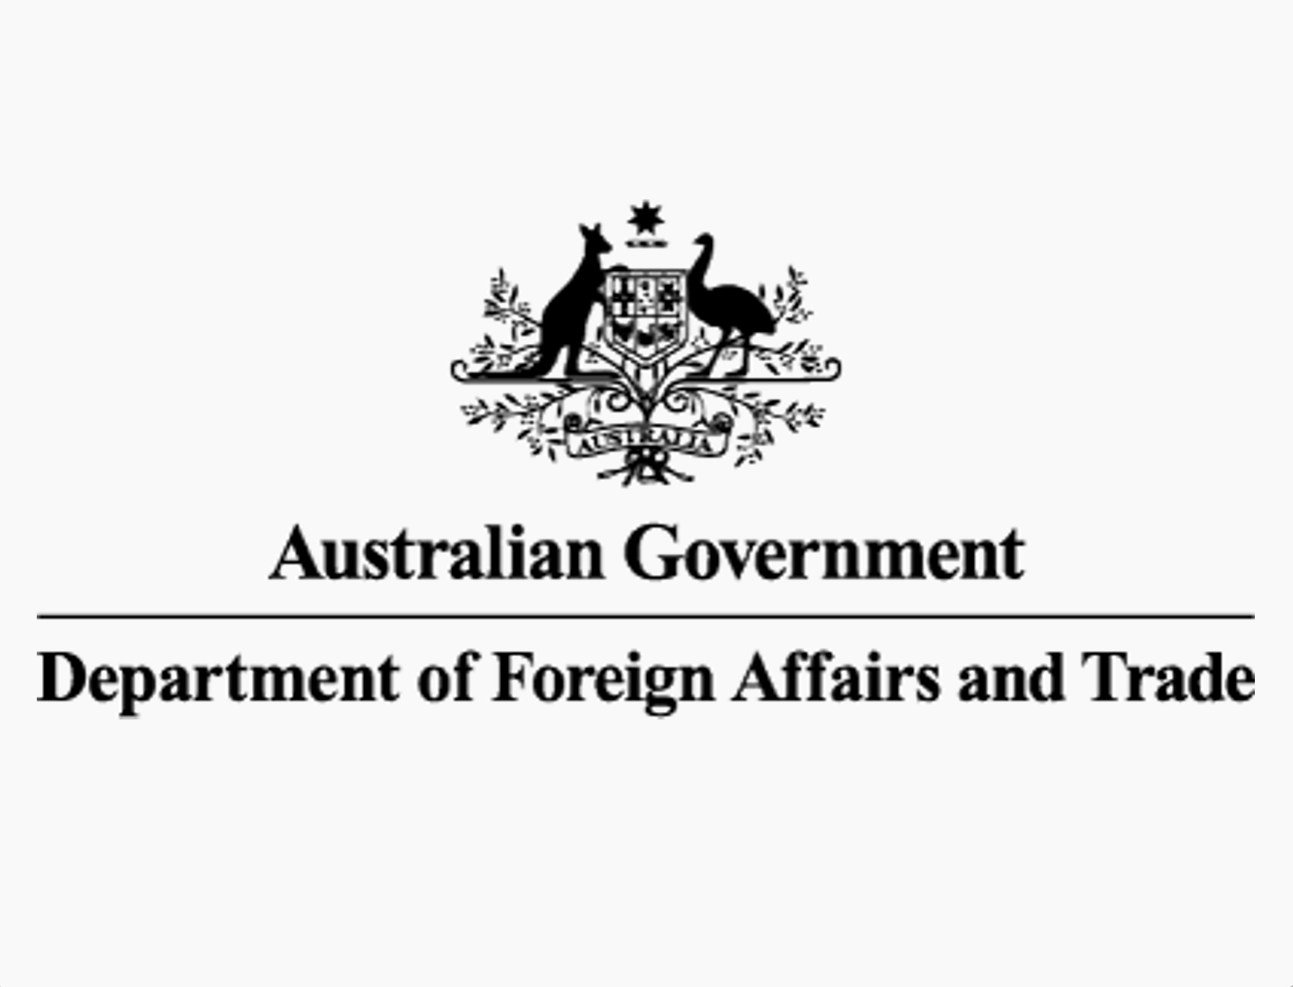 Australian Government Department of Foreign Affairs and Trade